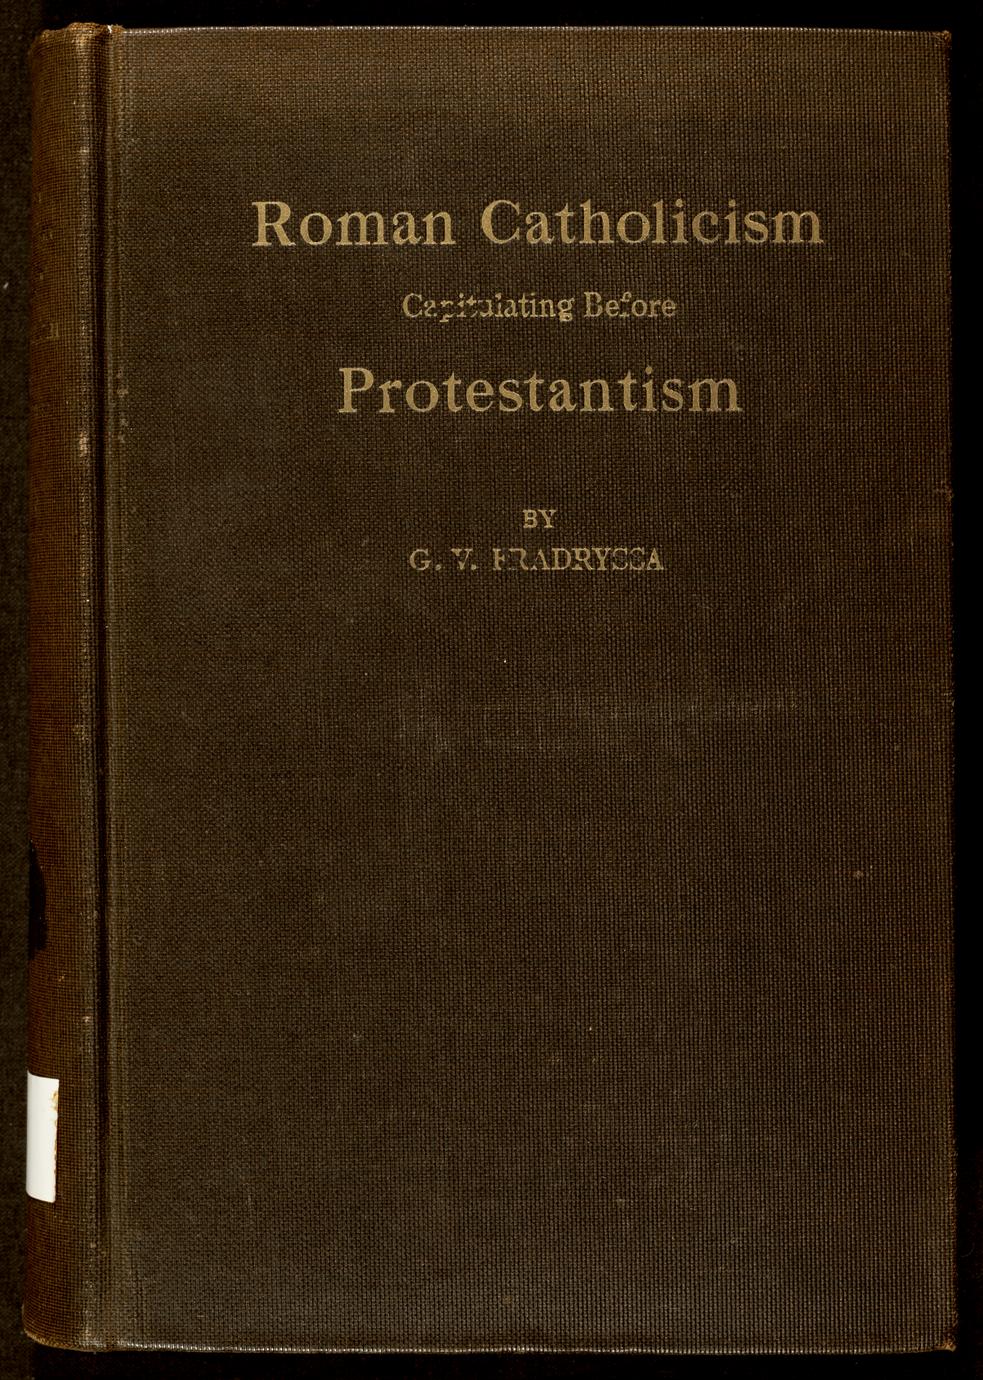 Roman Catholicism capitulating before Protestantism (1 of 2)